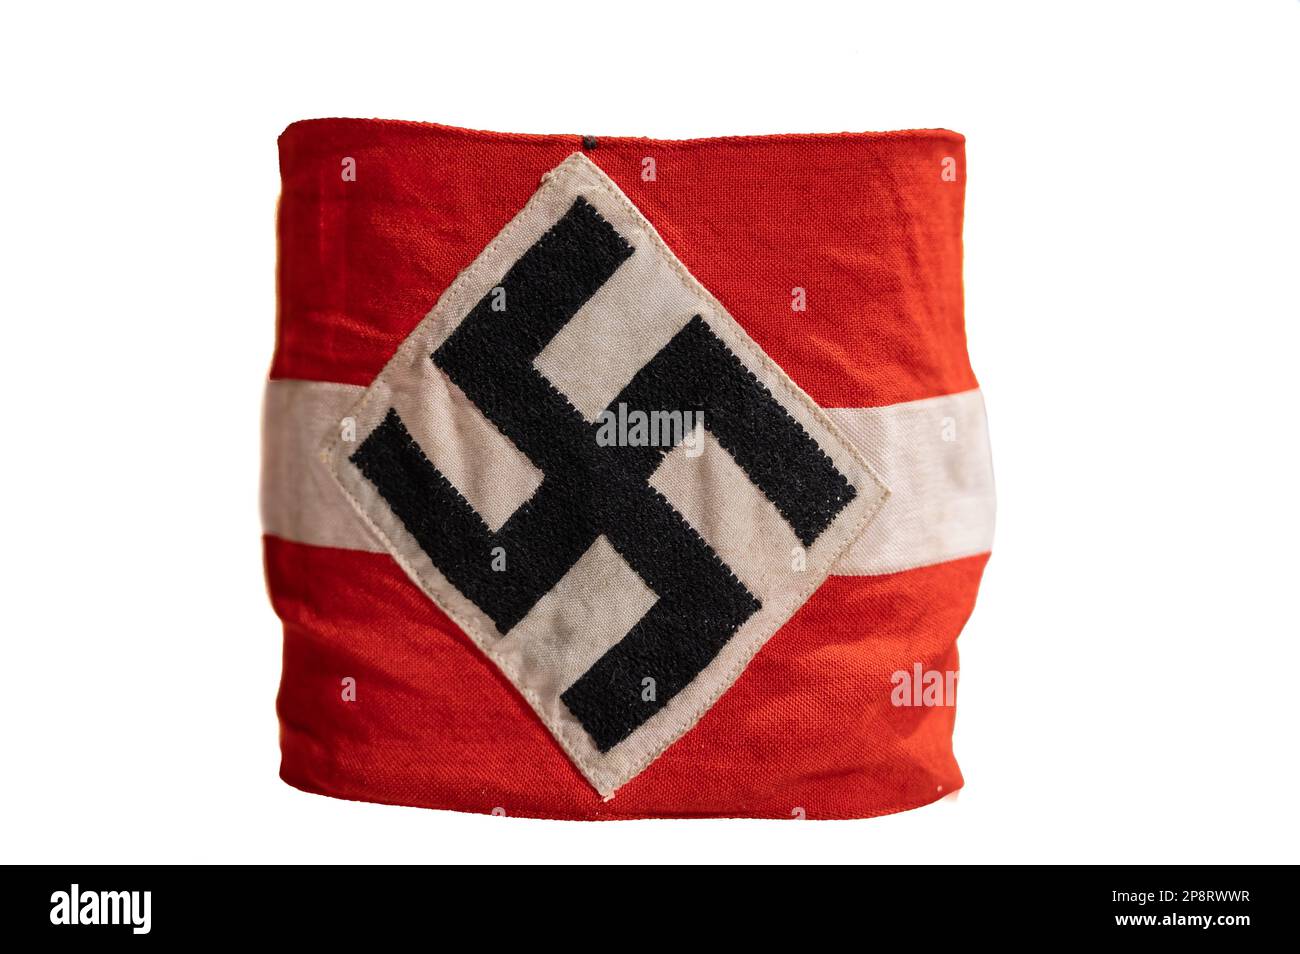 A small piece of fabric with the Nazi flag on it isolated on a white background Stock Photo